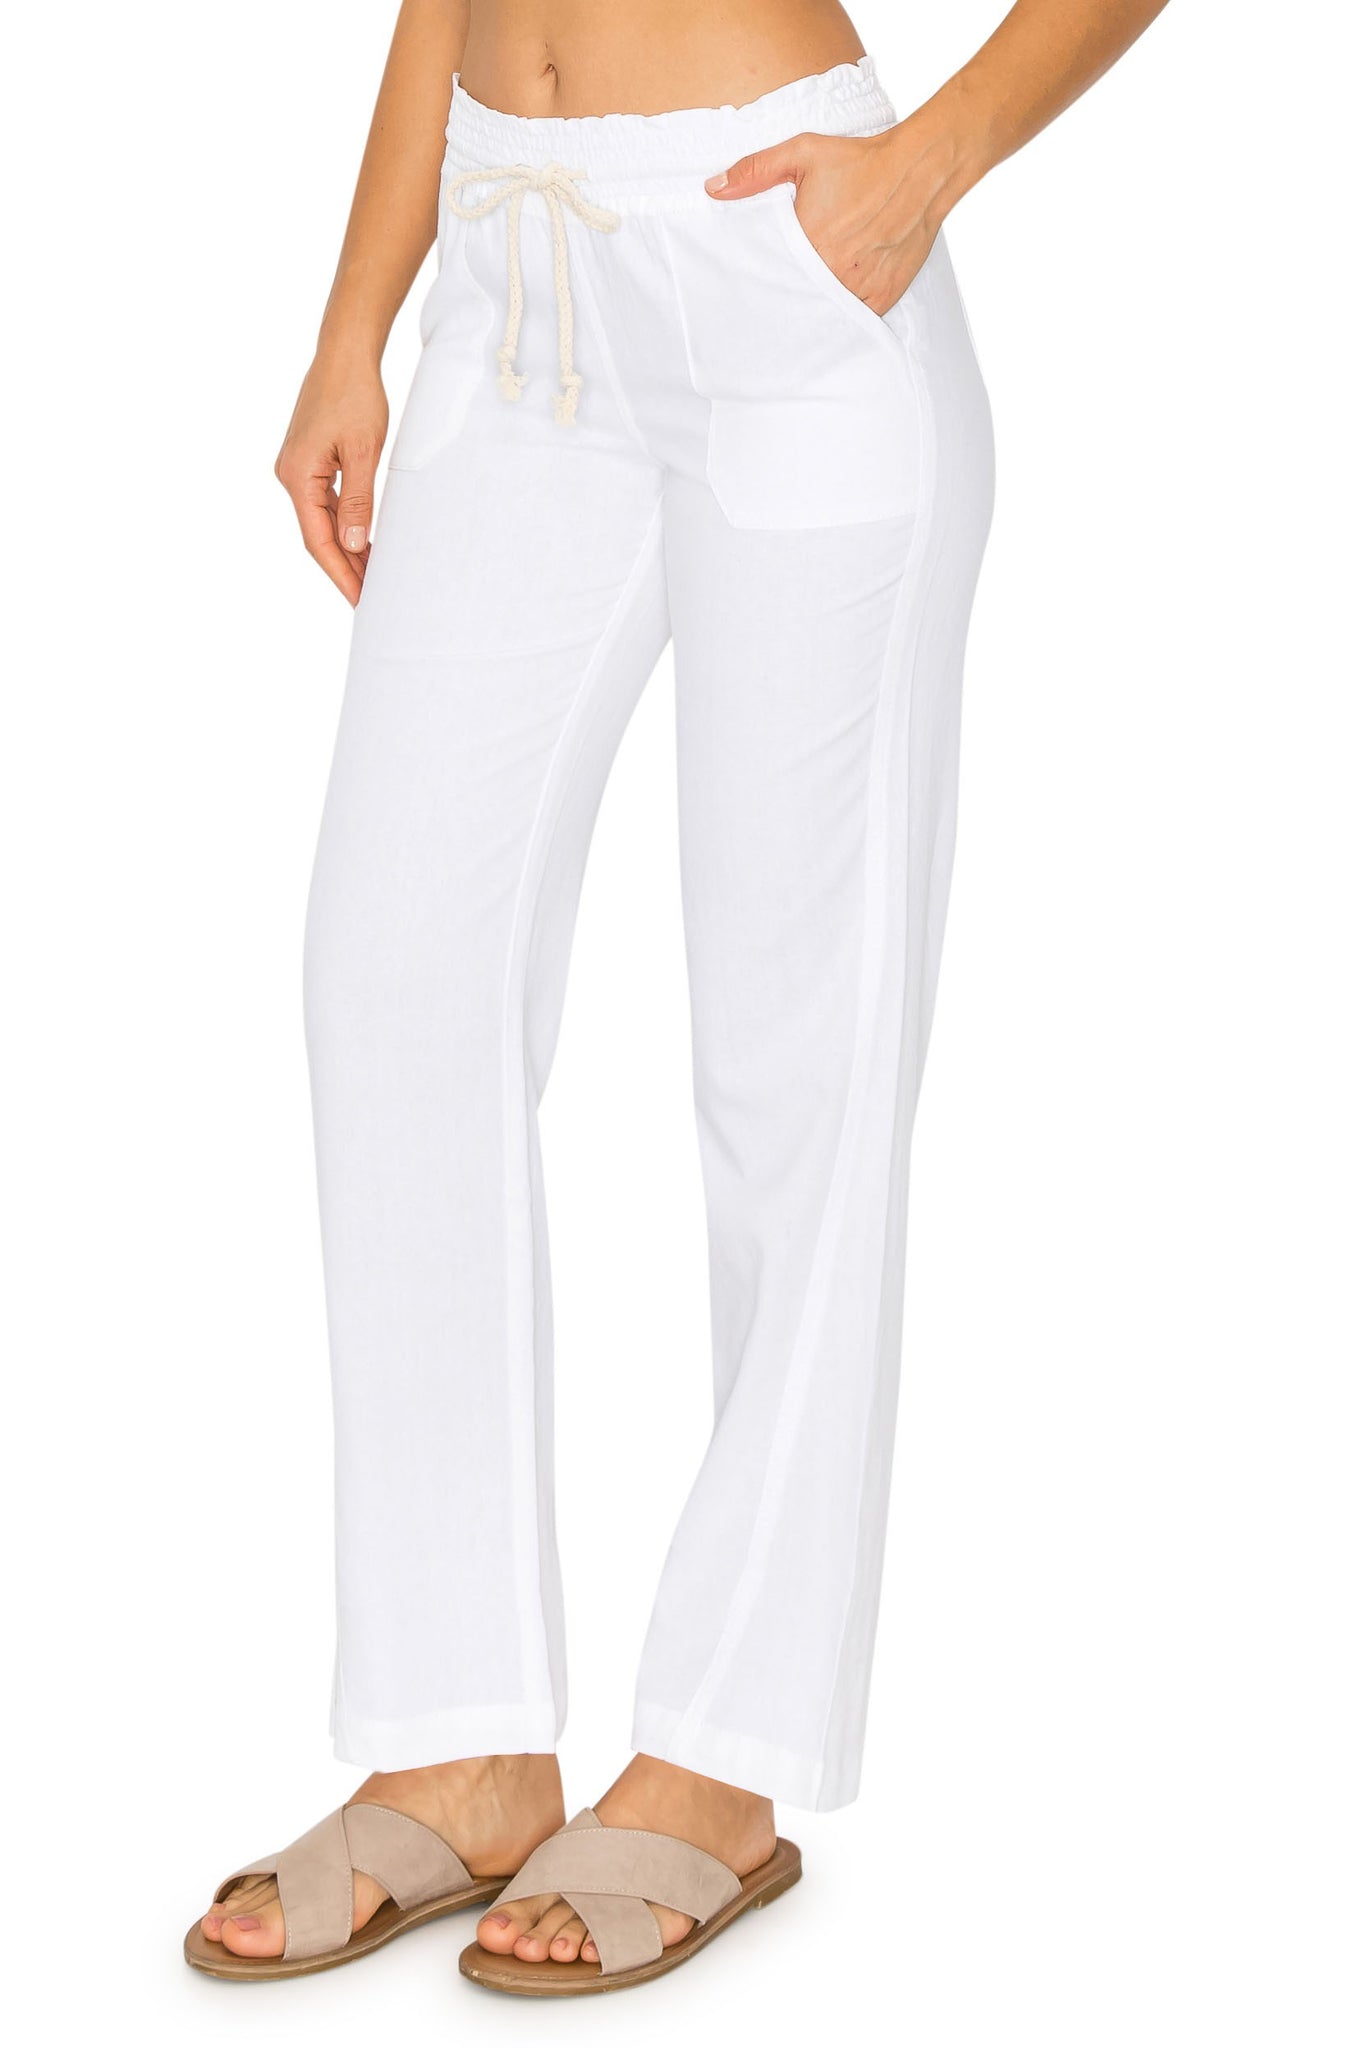 Daily Sports Irene Lined 29 inch Winter Trouser Redwood | ladies Golf  Trousers